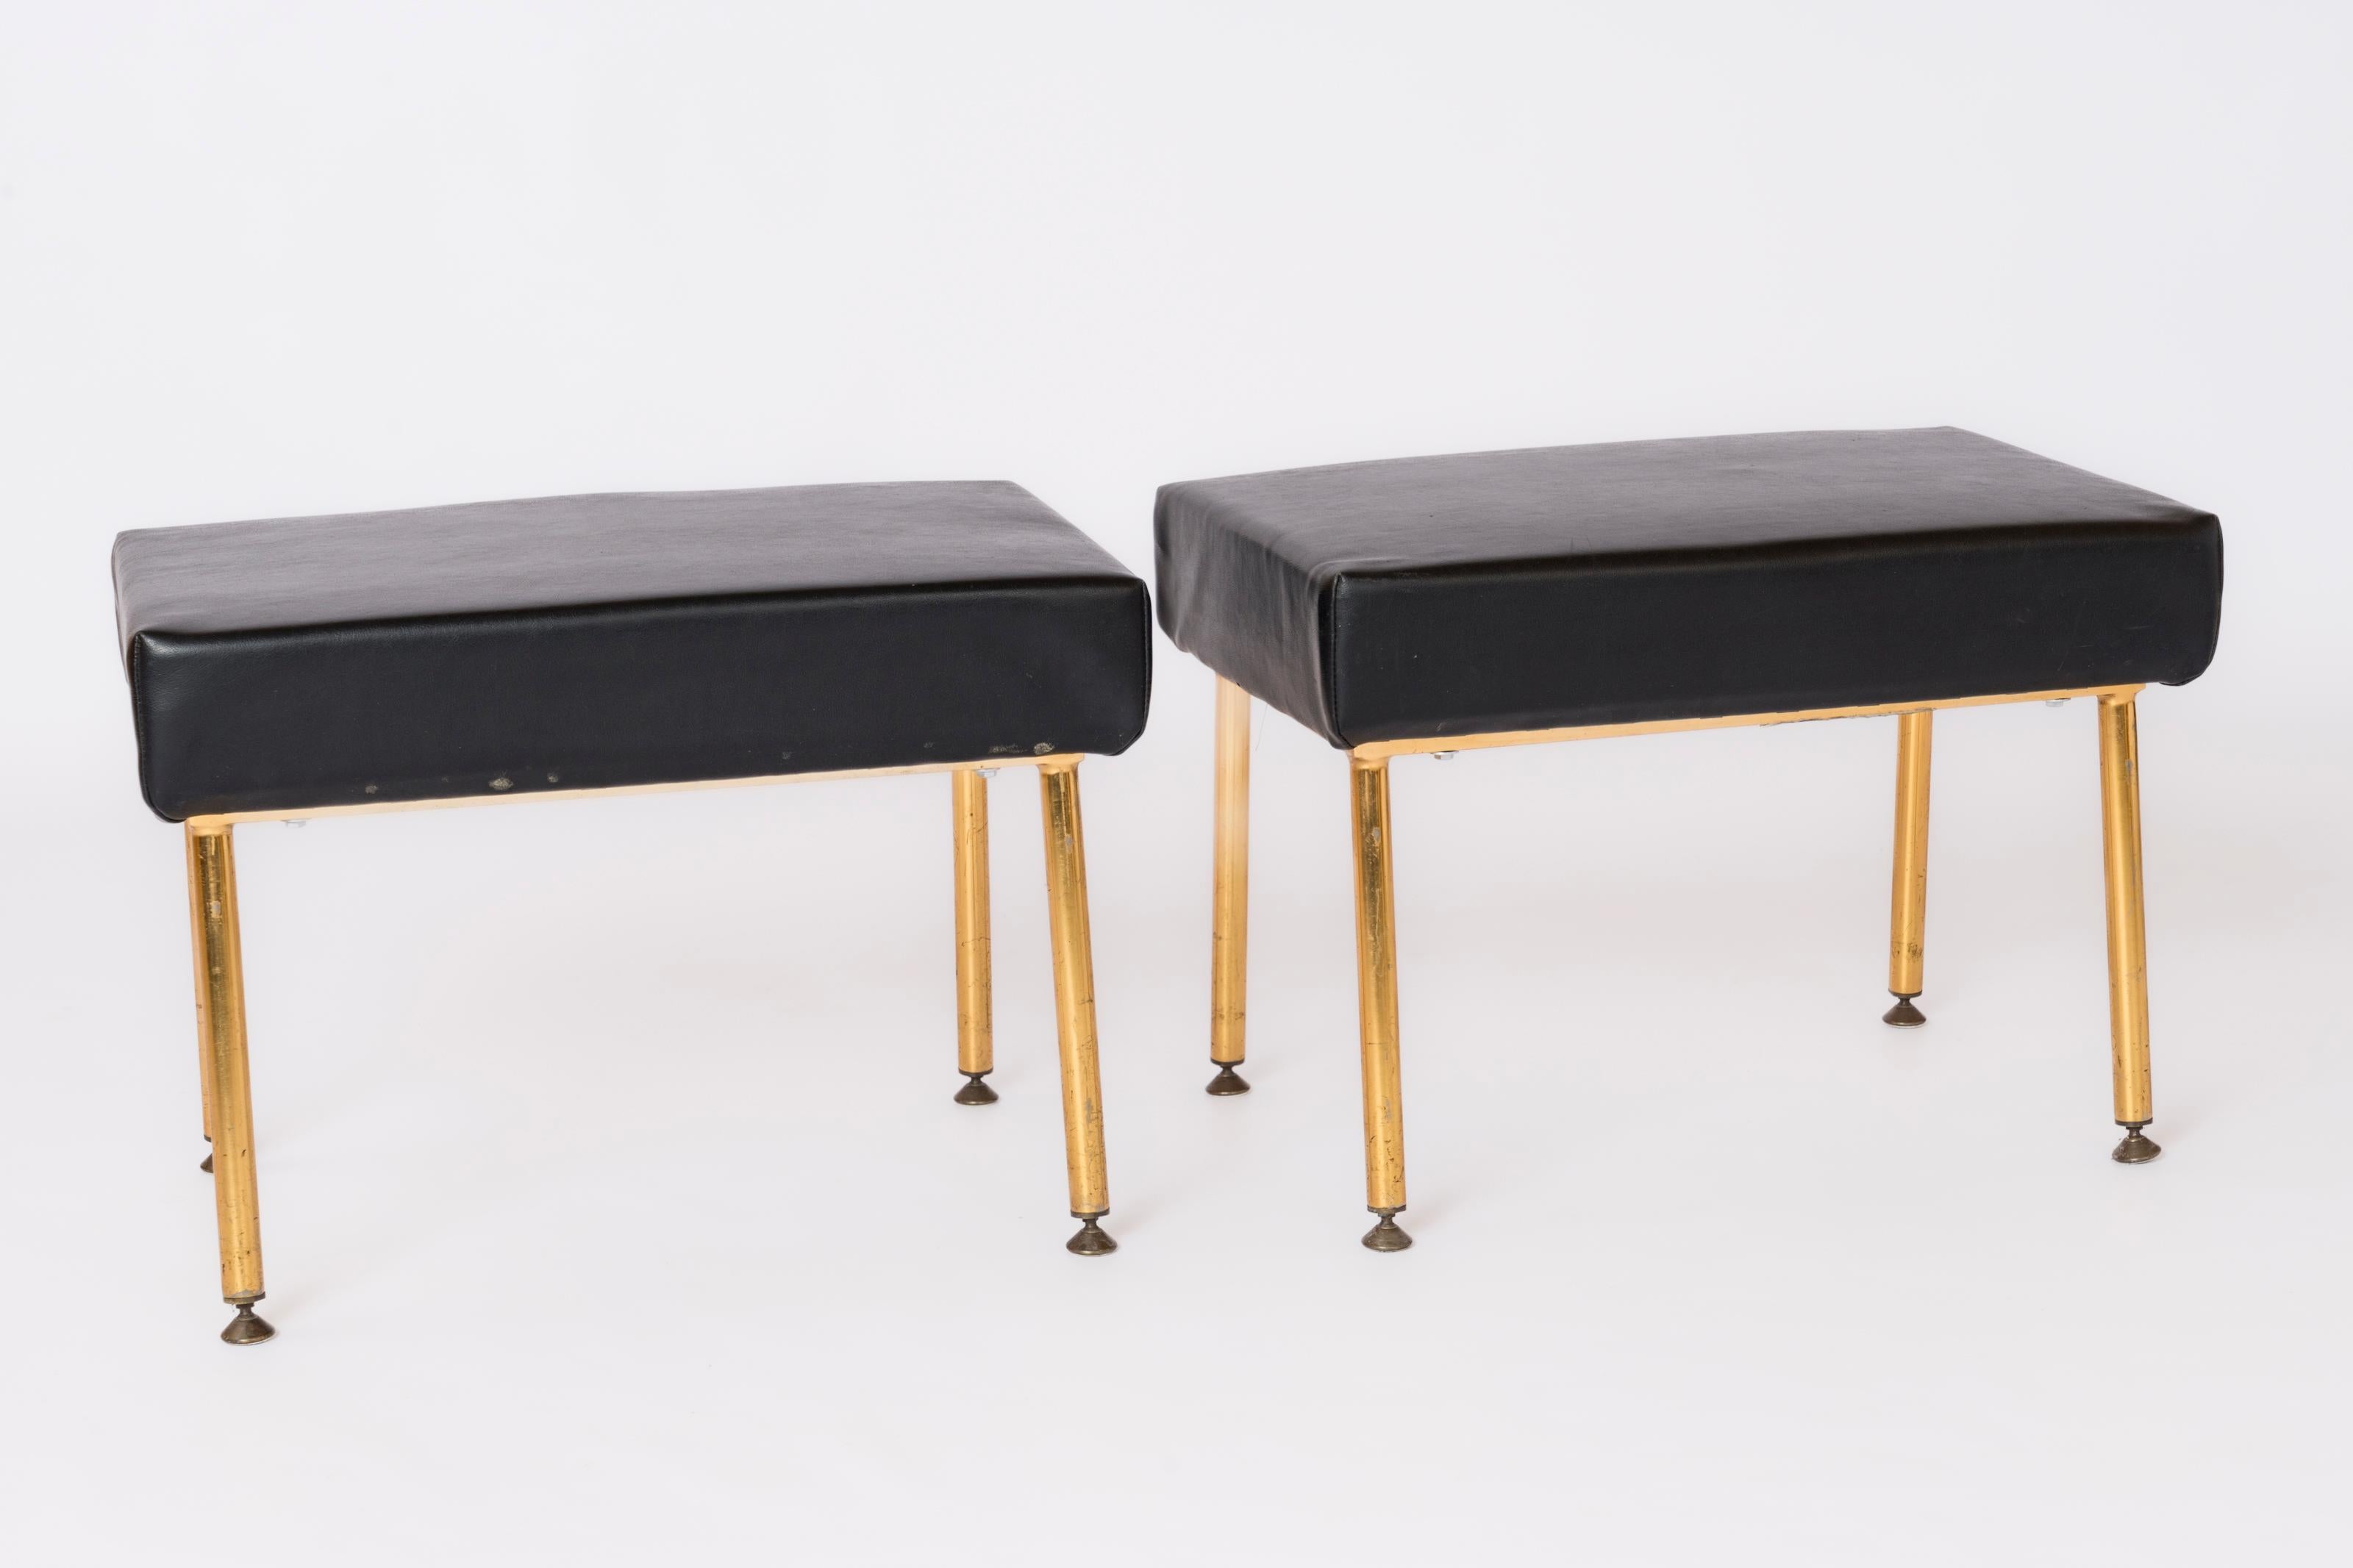 Pair of Gilt Metal & Moleskine Footstools or Benches by Airborne - France 1960's For Sale 3